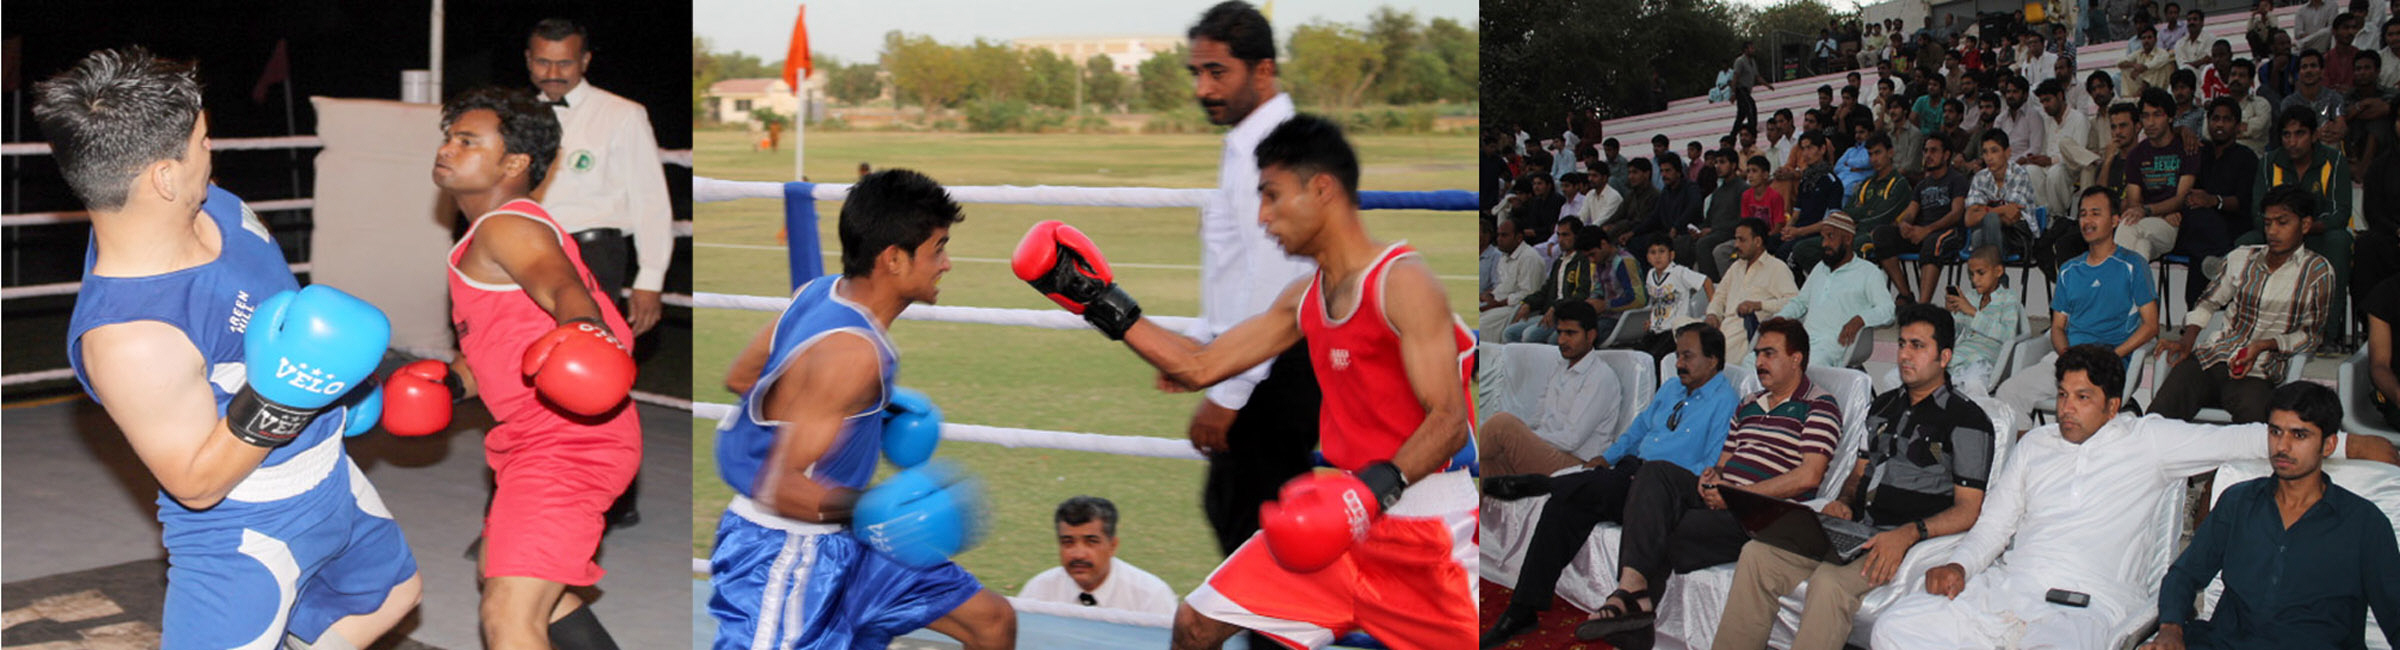 at least 85 pugilists represented 16 universities in the championship photo shahid ali express